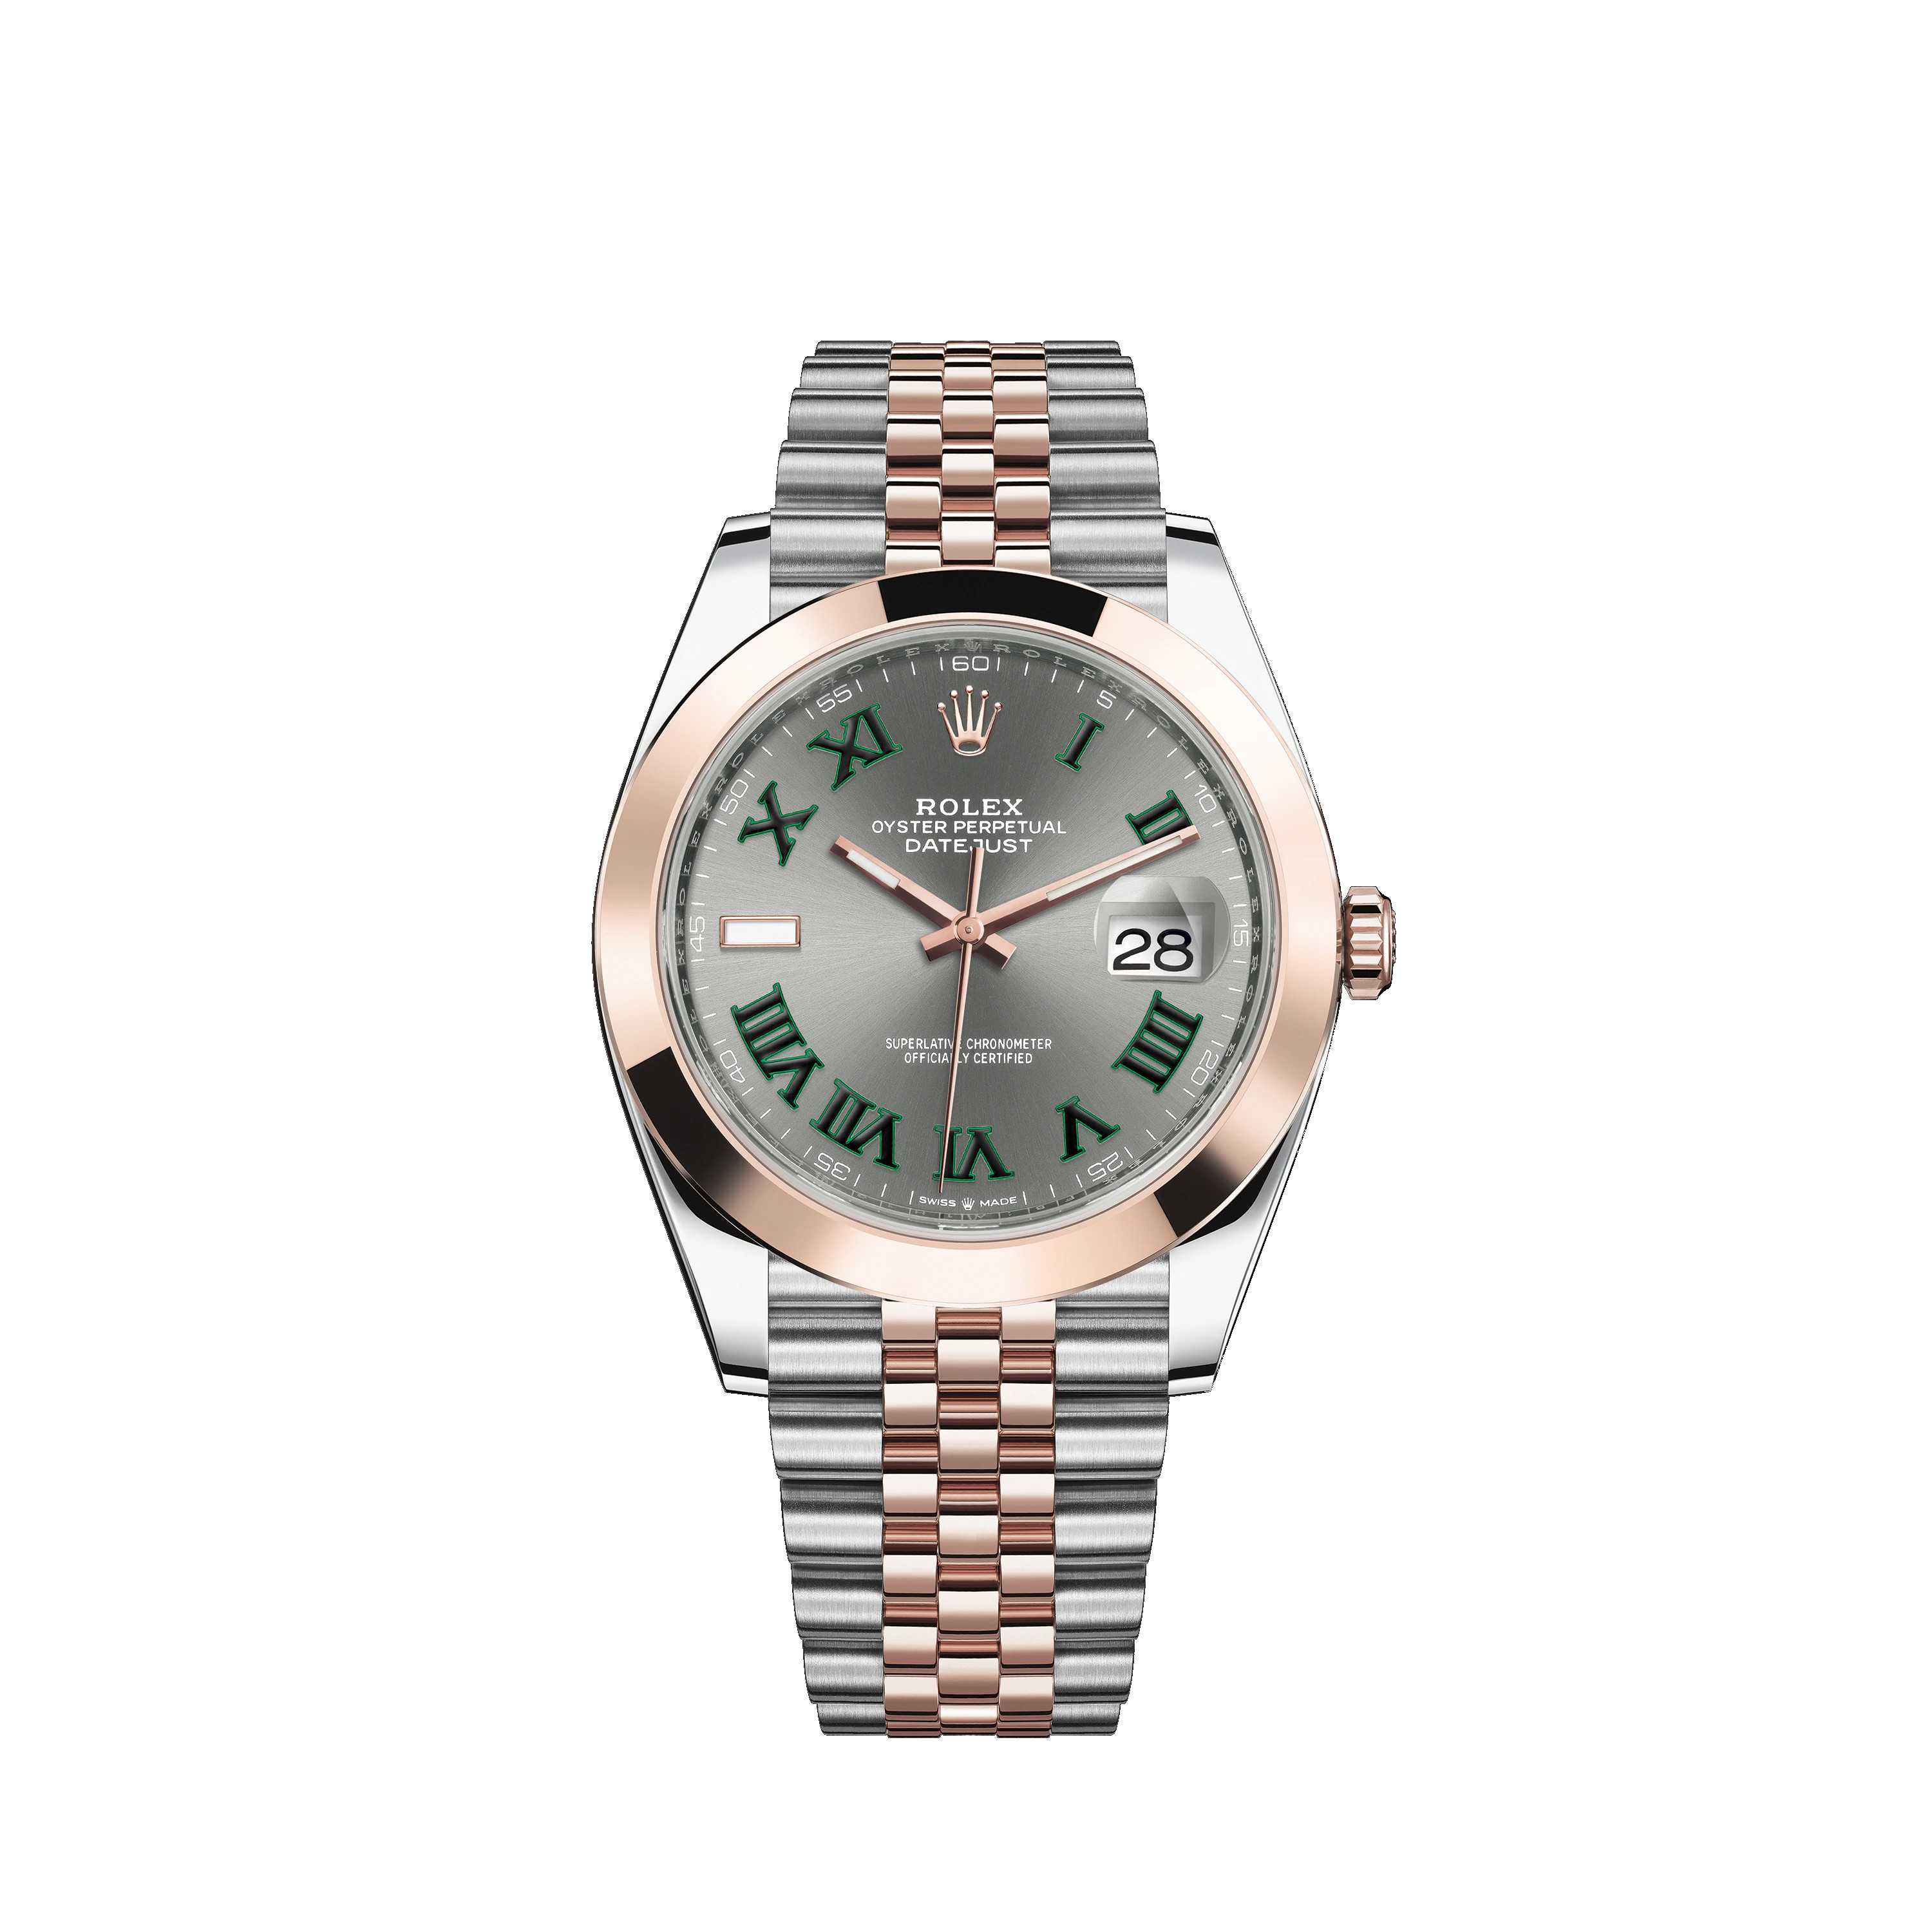 Datejust 41 126301 Rose Gold & Stainless Steel Watch (Slate)